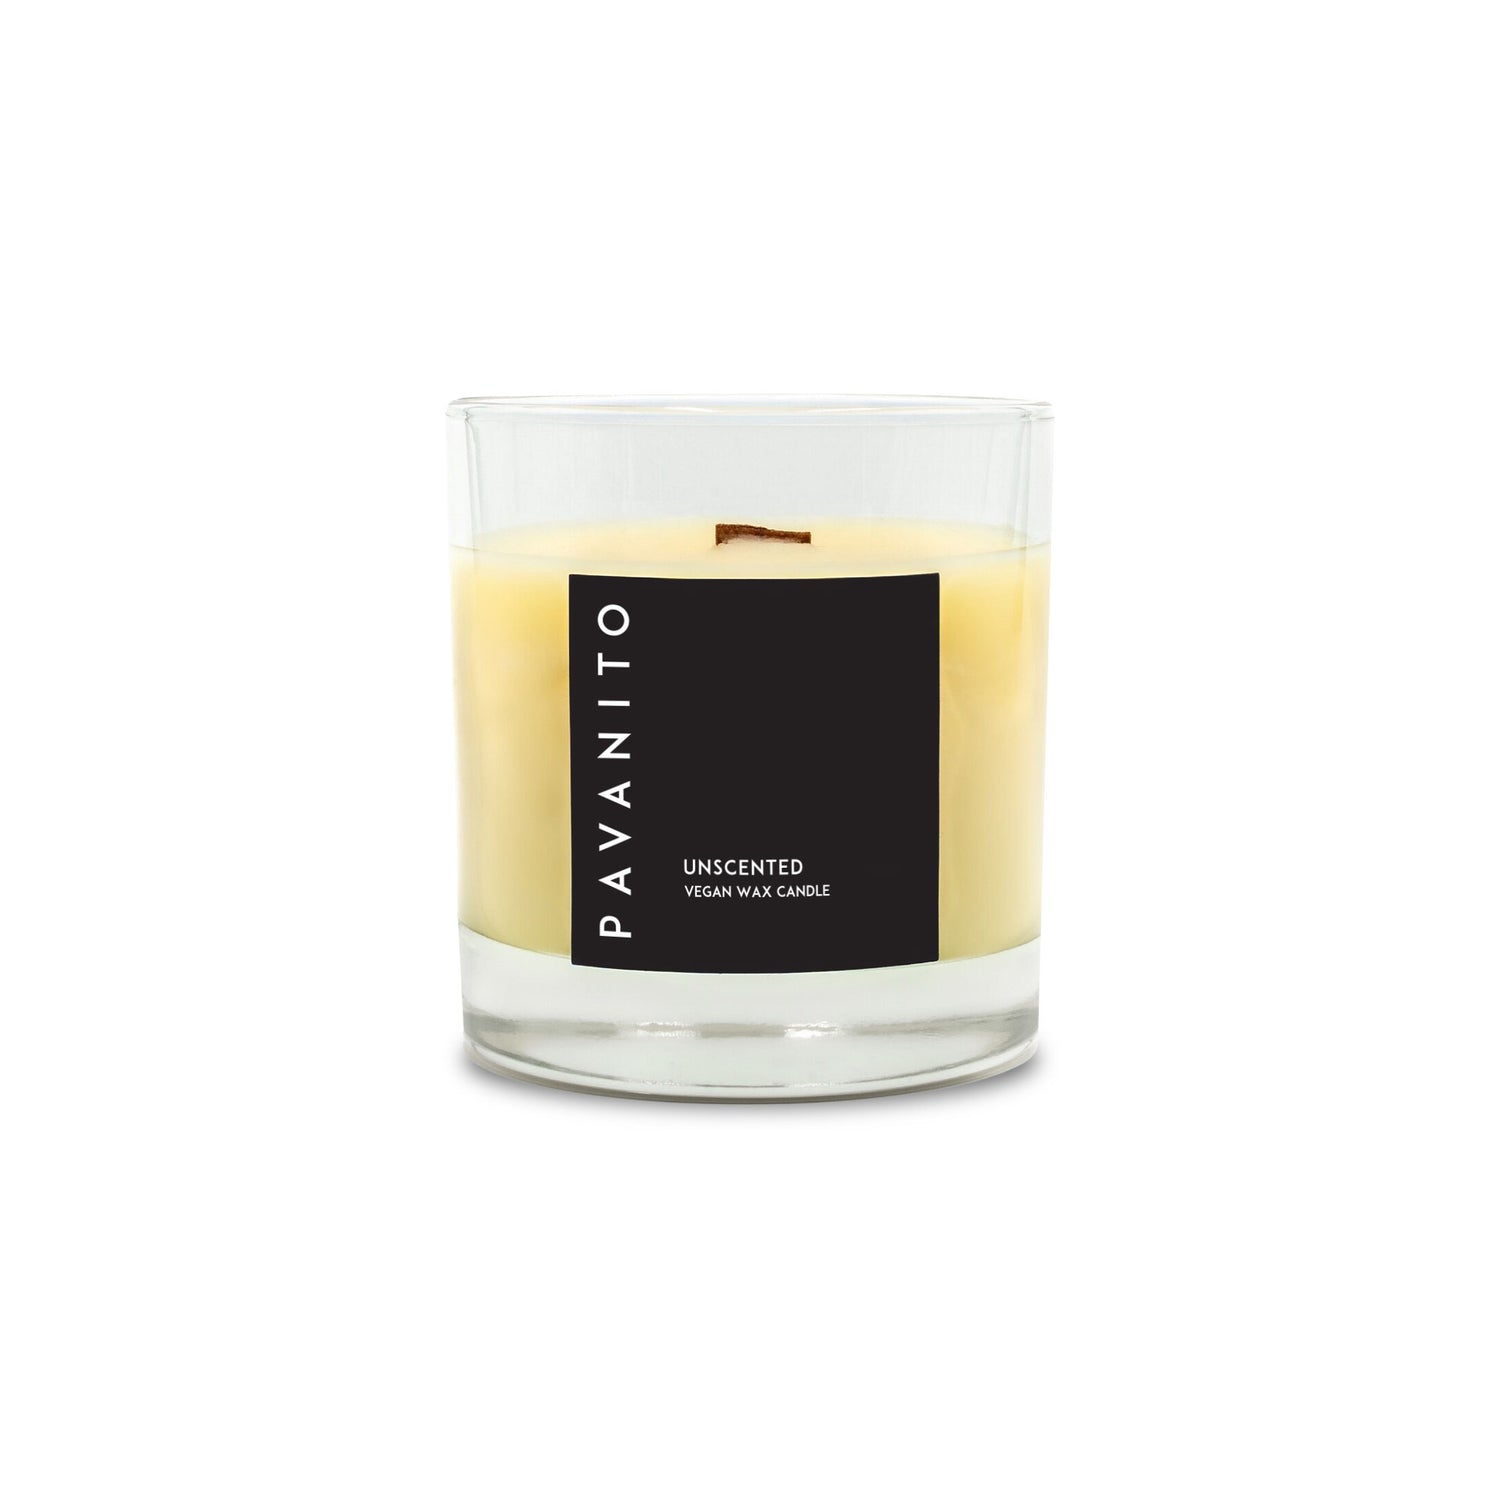 Unscented Vegan Wax Candle